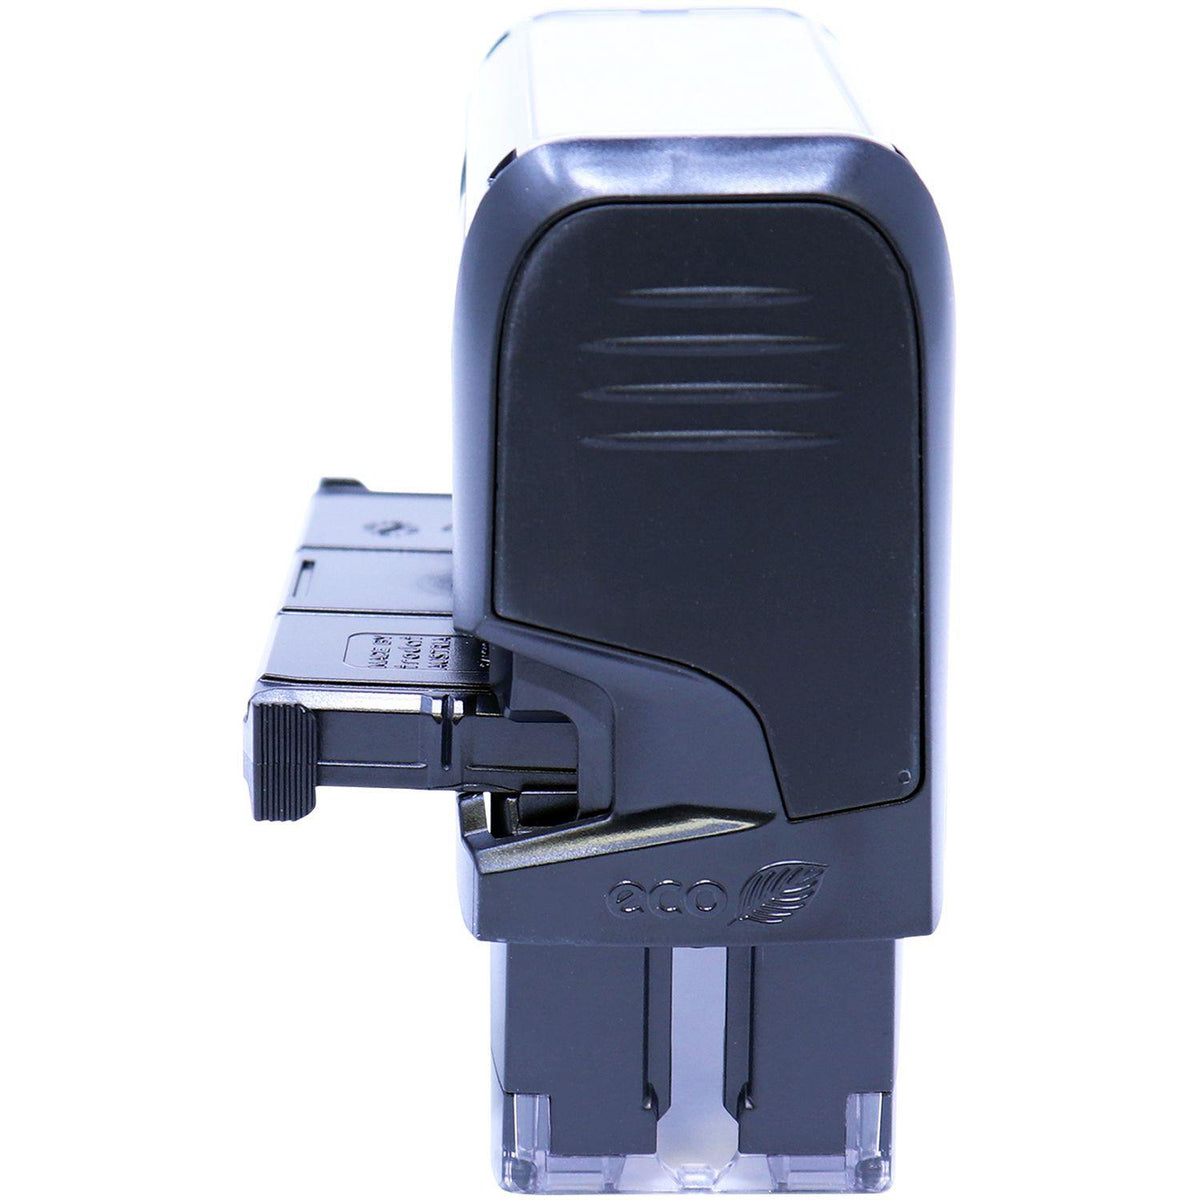 Self-Inking Formas Stamp - Engineer Seal Stamps - Brand_Trodat, Impression Size_Small, Stamp Type_Self-Inking Stamp, Type of Use_General, Type of Use_Office, Type of Use_Professional